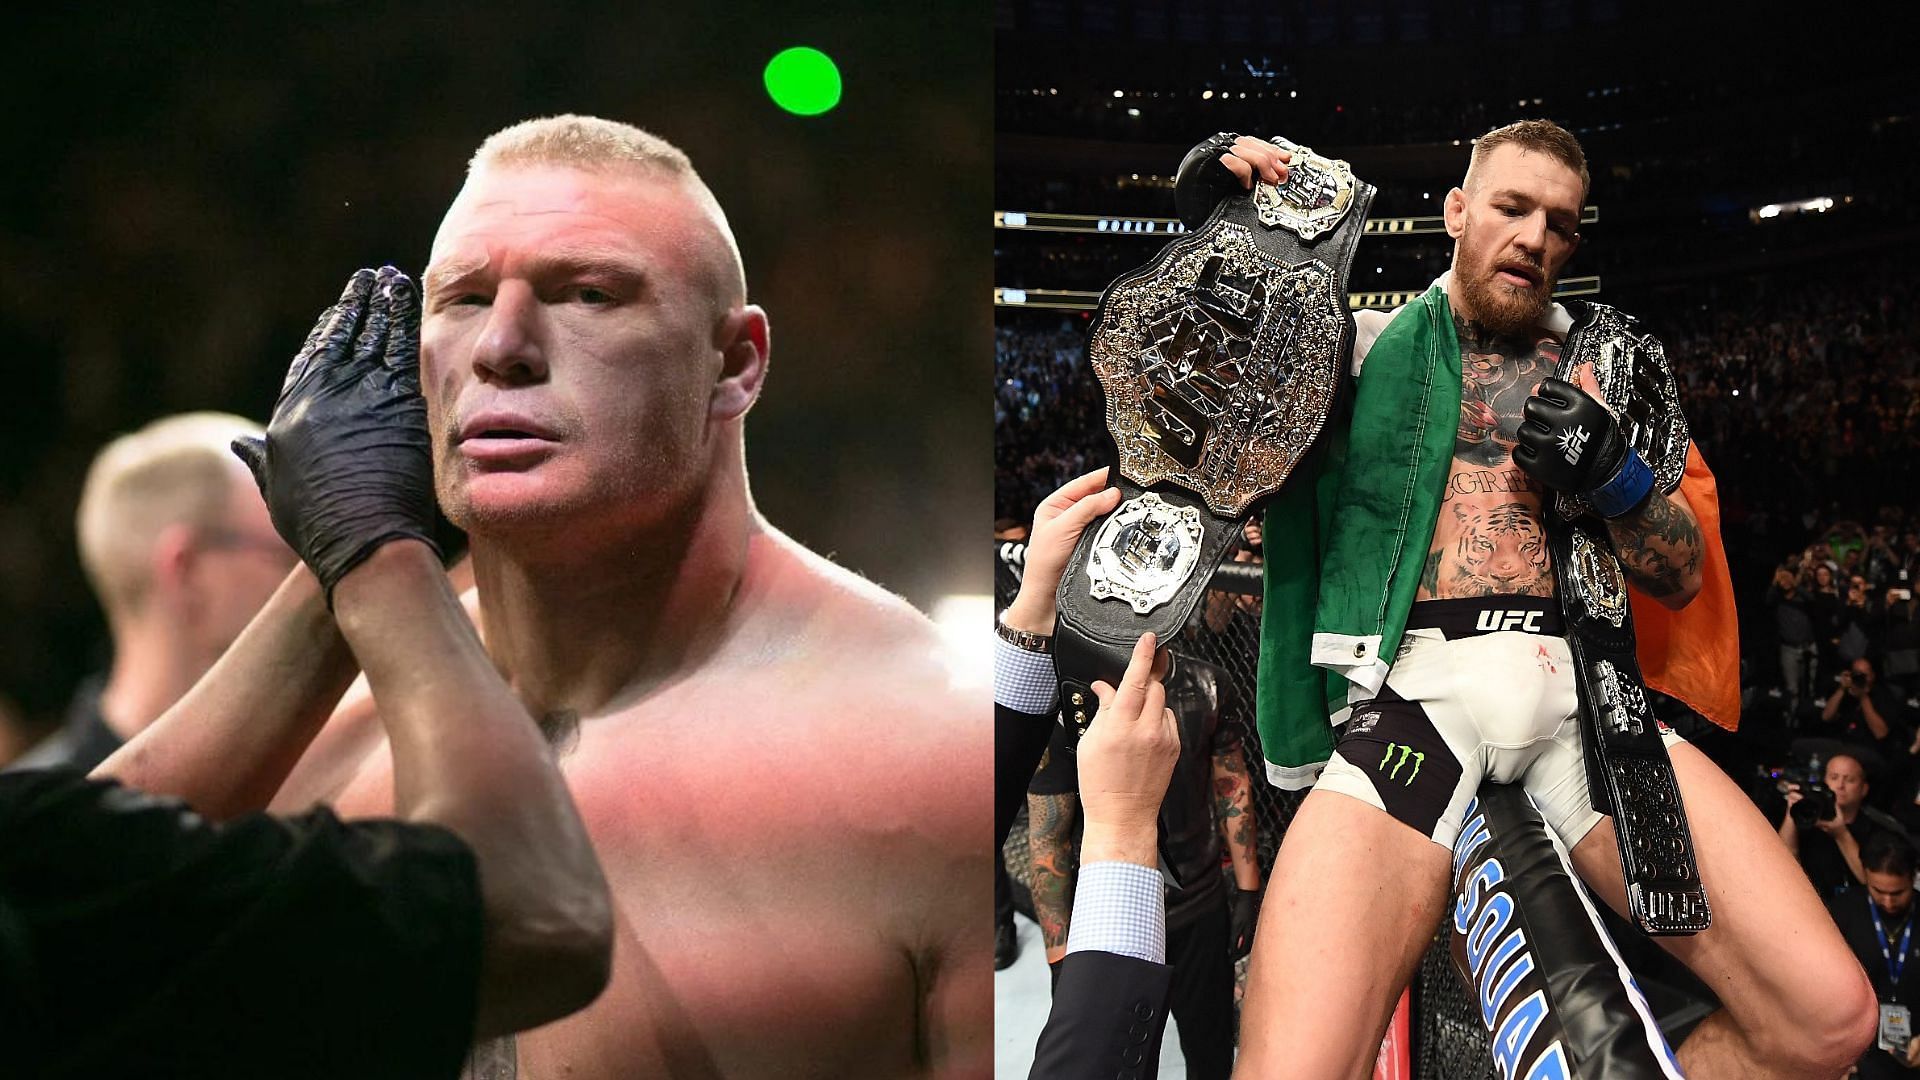 A look into the into the interactions between UFC legends Brock Lesnar and Conor McGregor